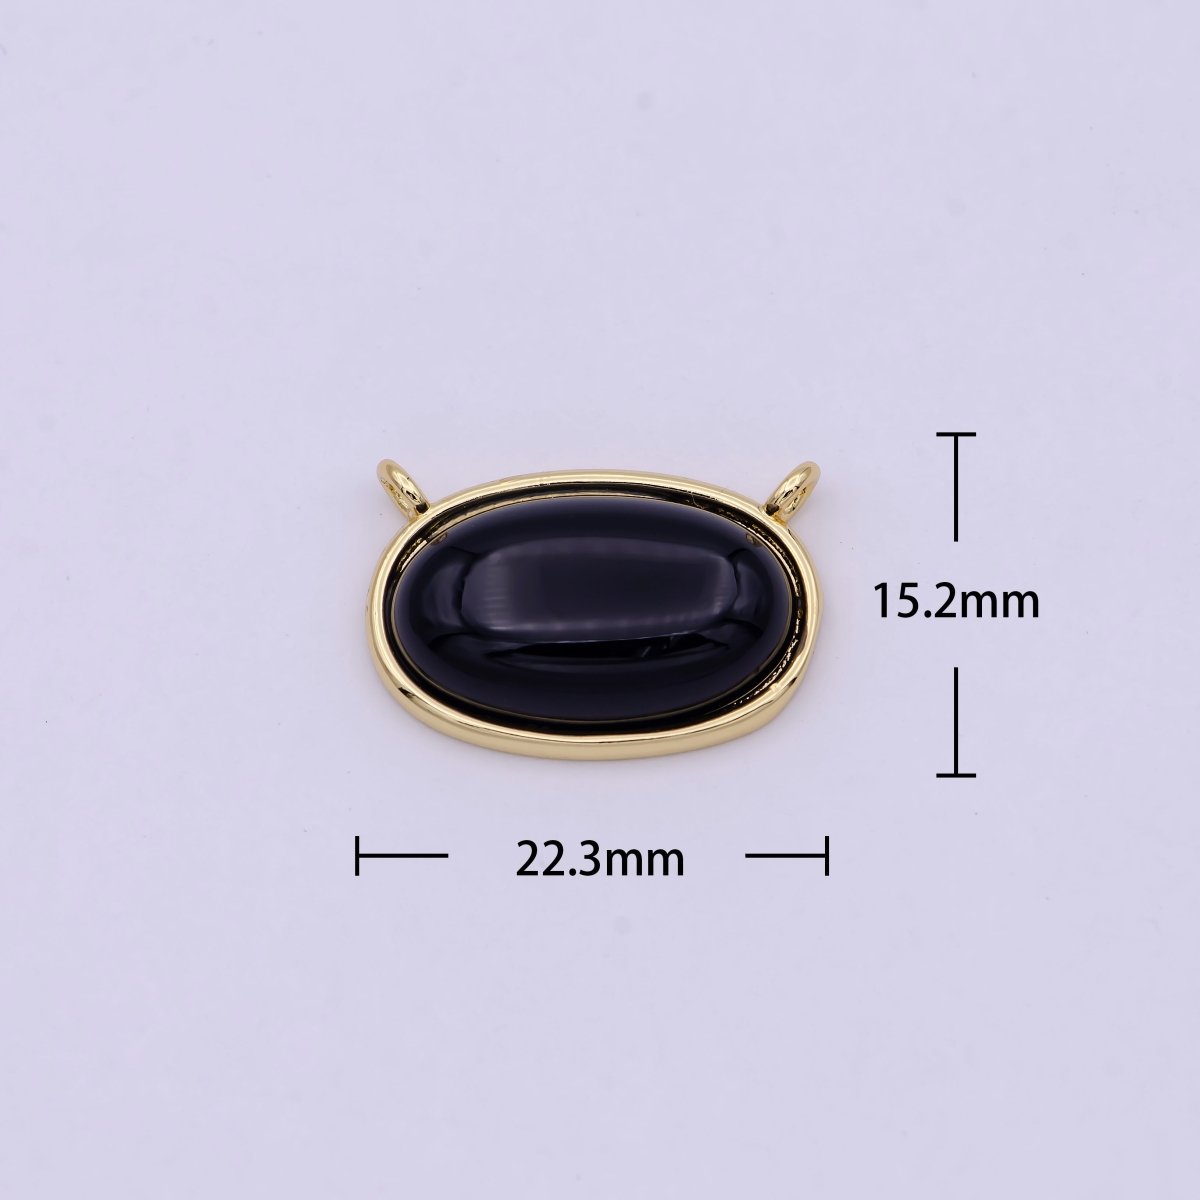 Black onyx Charm Connector Classic vintage Oval crystal protection gemstone stone pendant necklace jewelry for women N-112 - DLUXCA